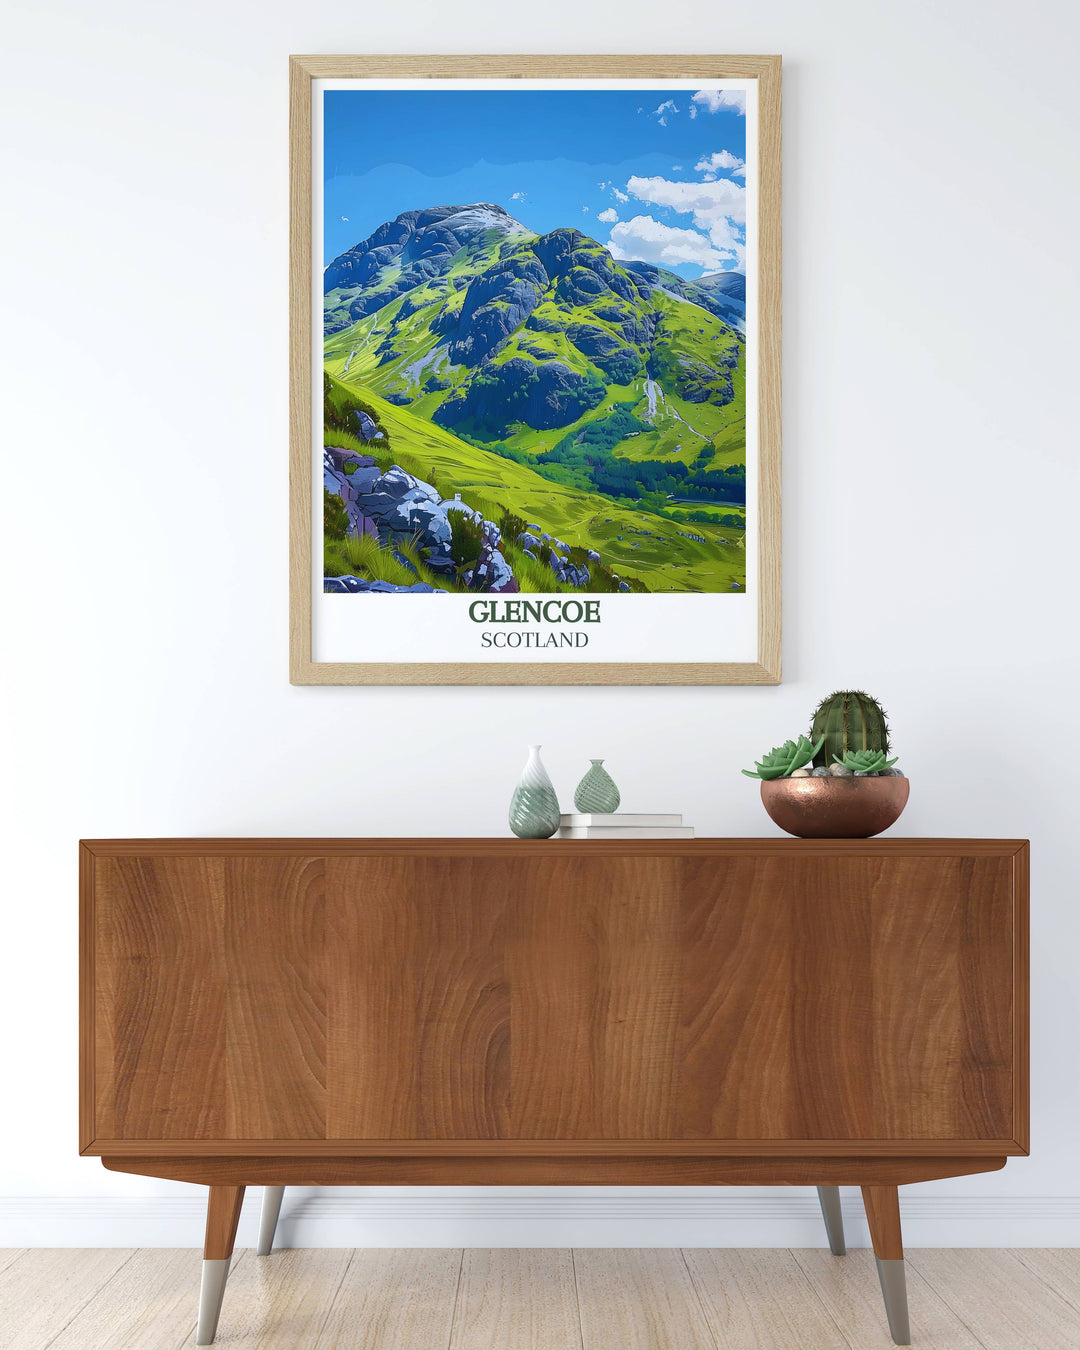 Three Sisters of Glencoe Poster capturing the breathtaking scenery of Glencoe Scotland ideal for those who love travel and nature an exquisite piece of art that adds charm and elegance to your home decor perfect for enhancing any living space